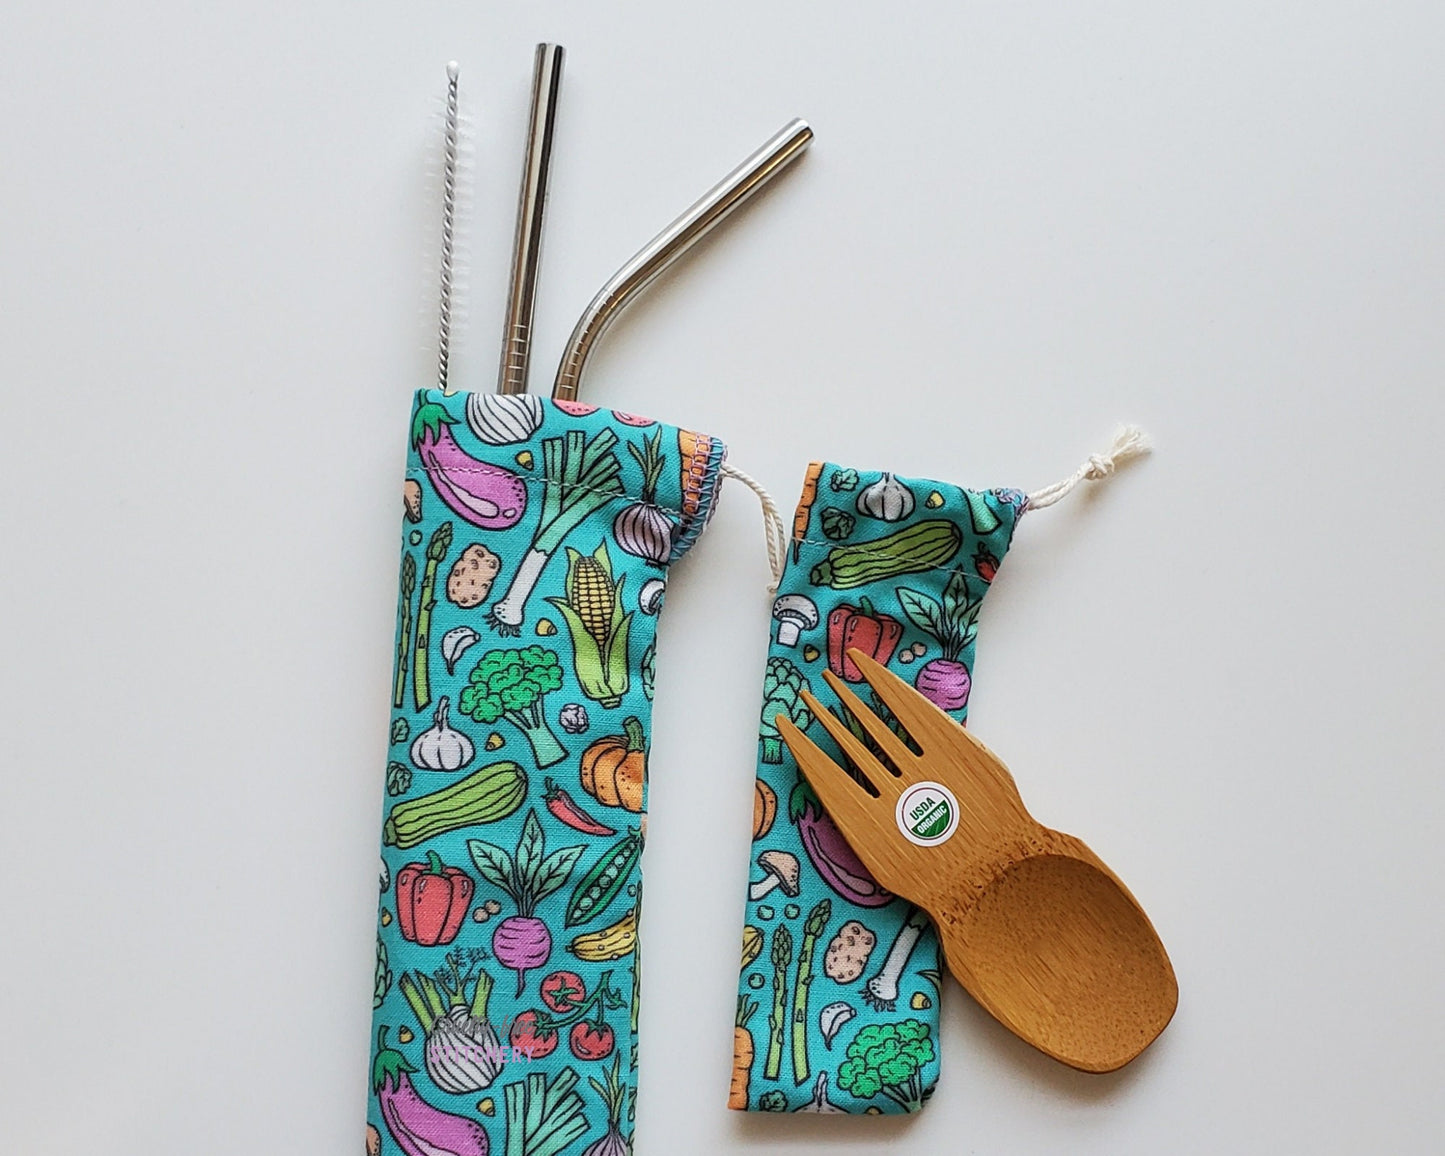 Reusable bamboo spork and stainless steel straw pouch set. The pouches are both a teal blue background with cartoon vegetables printed on the fabric. Eggplants, radishes, peppers, tomatoes, asparagus, broccoli, mushrooms, and more.